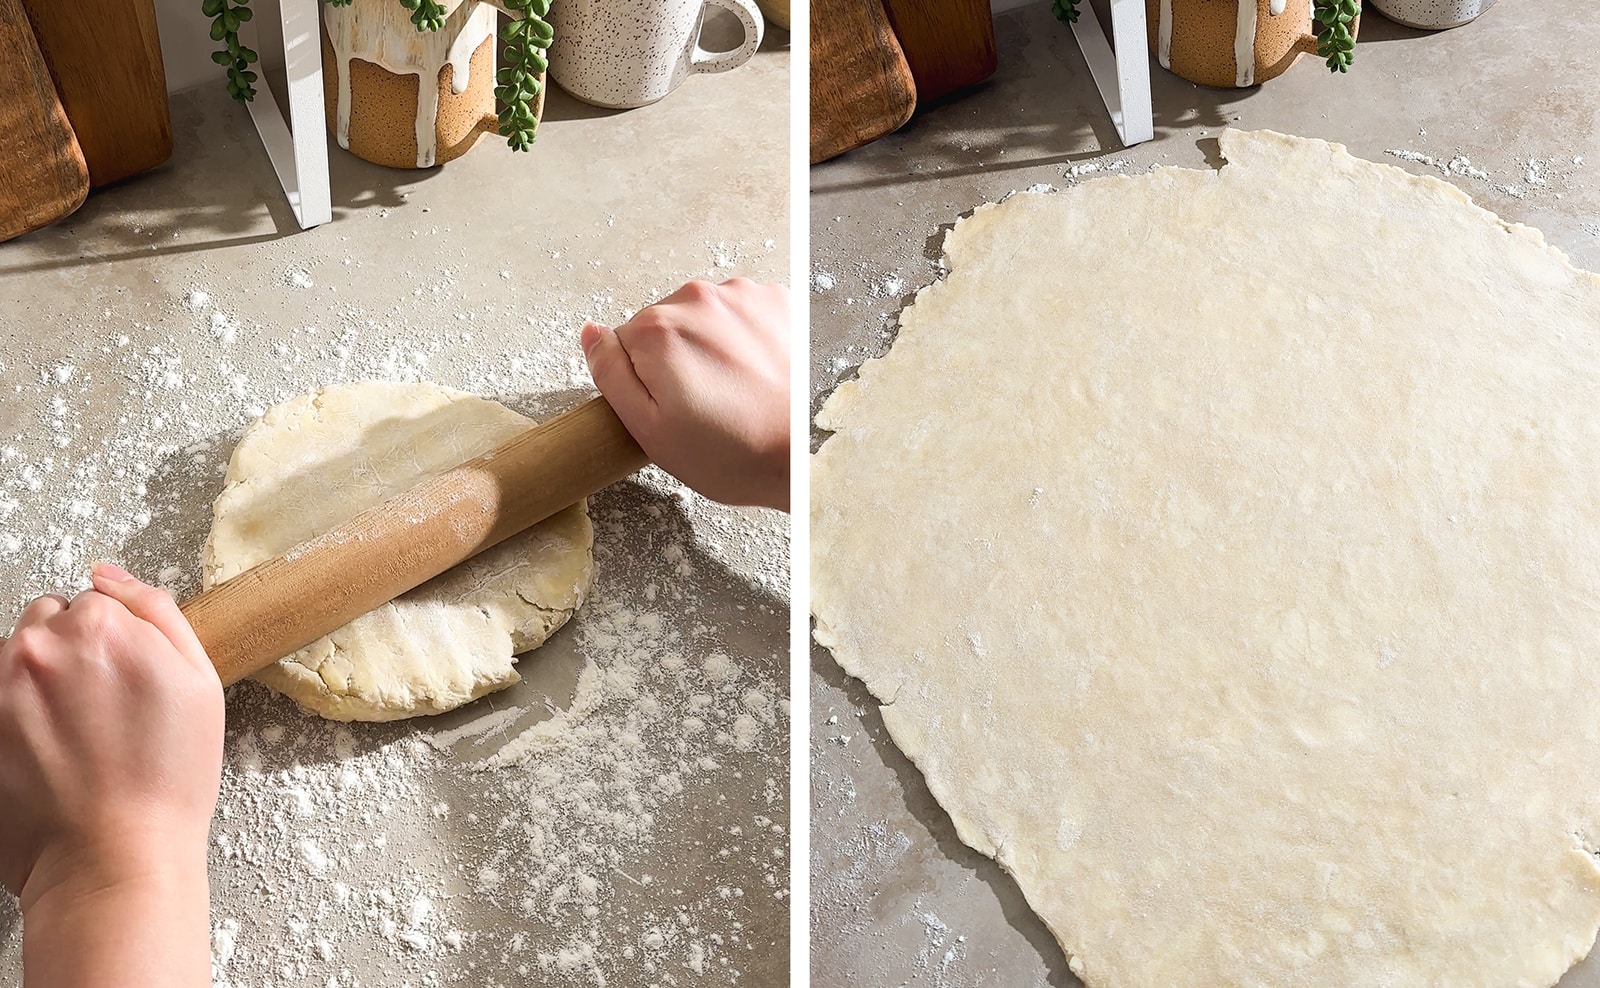 Left to right: rolling out a disc of dough with a rolling pin, rolled out dough on the counter.